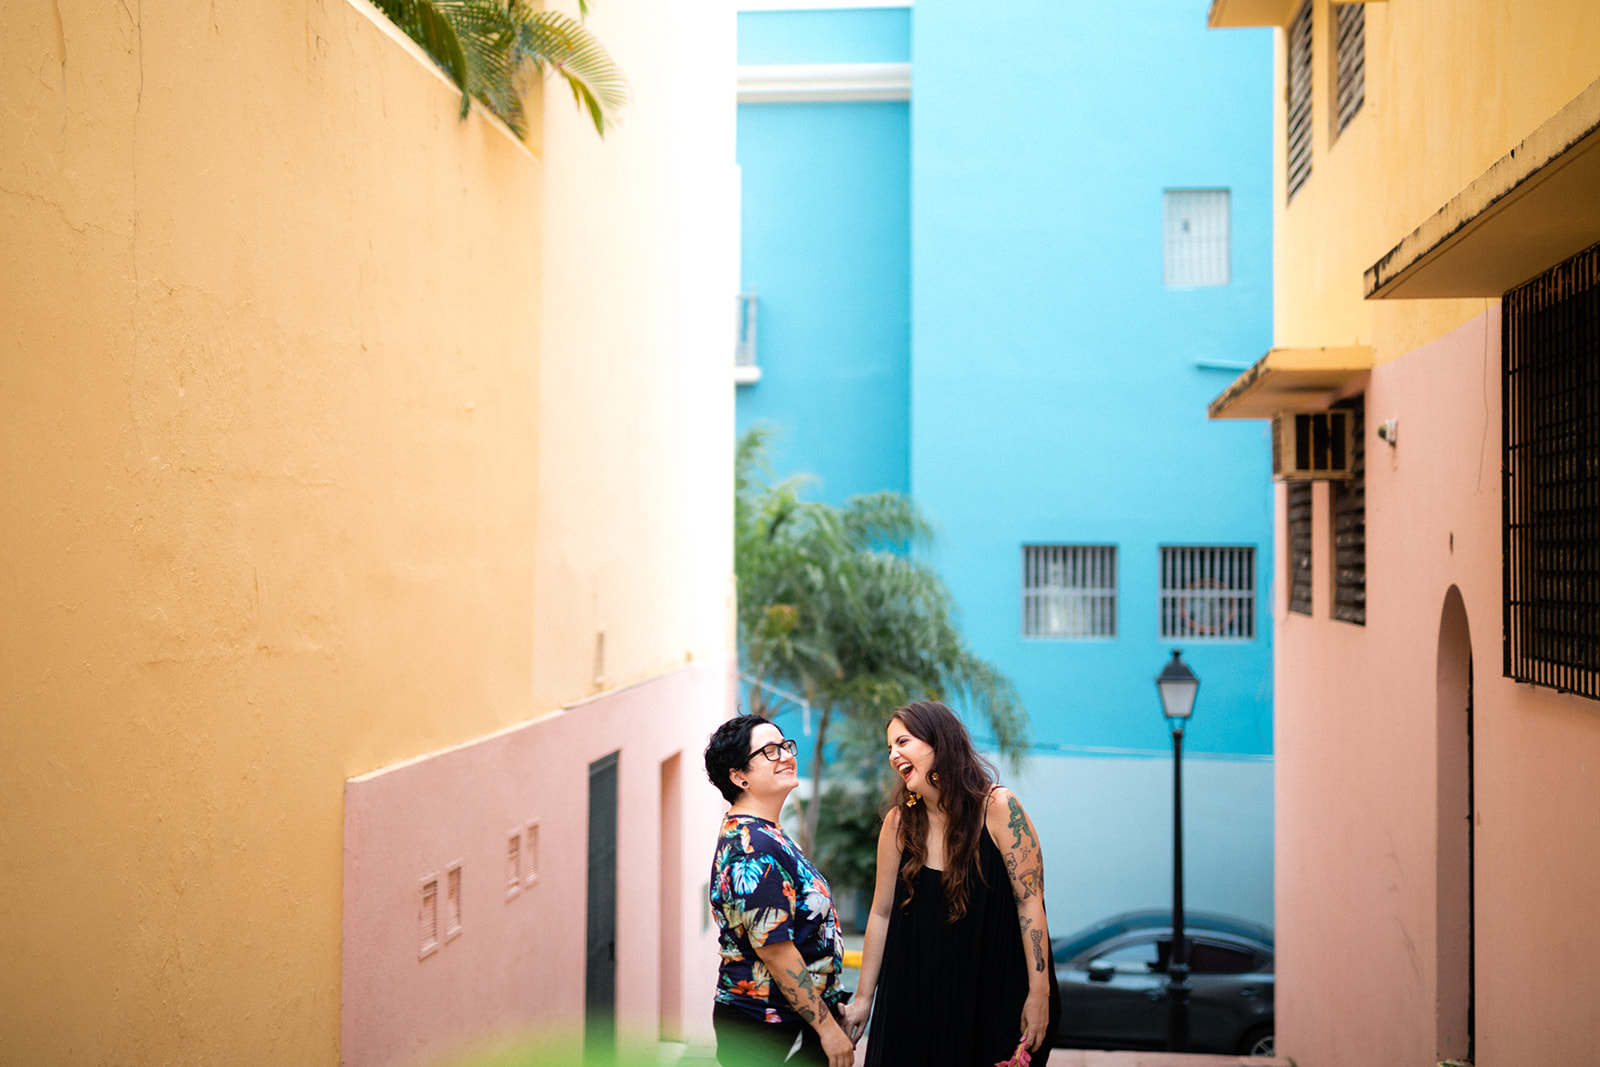 A cute queer couple laughs together surrounded by colorful buildings in Old San Juan.